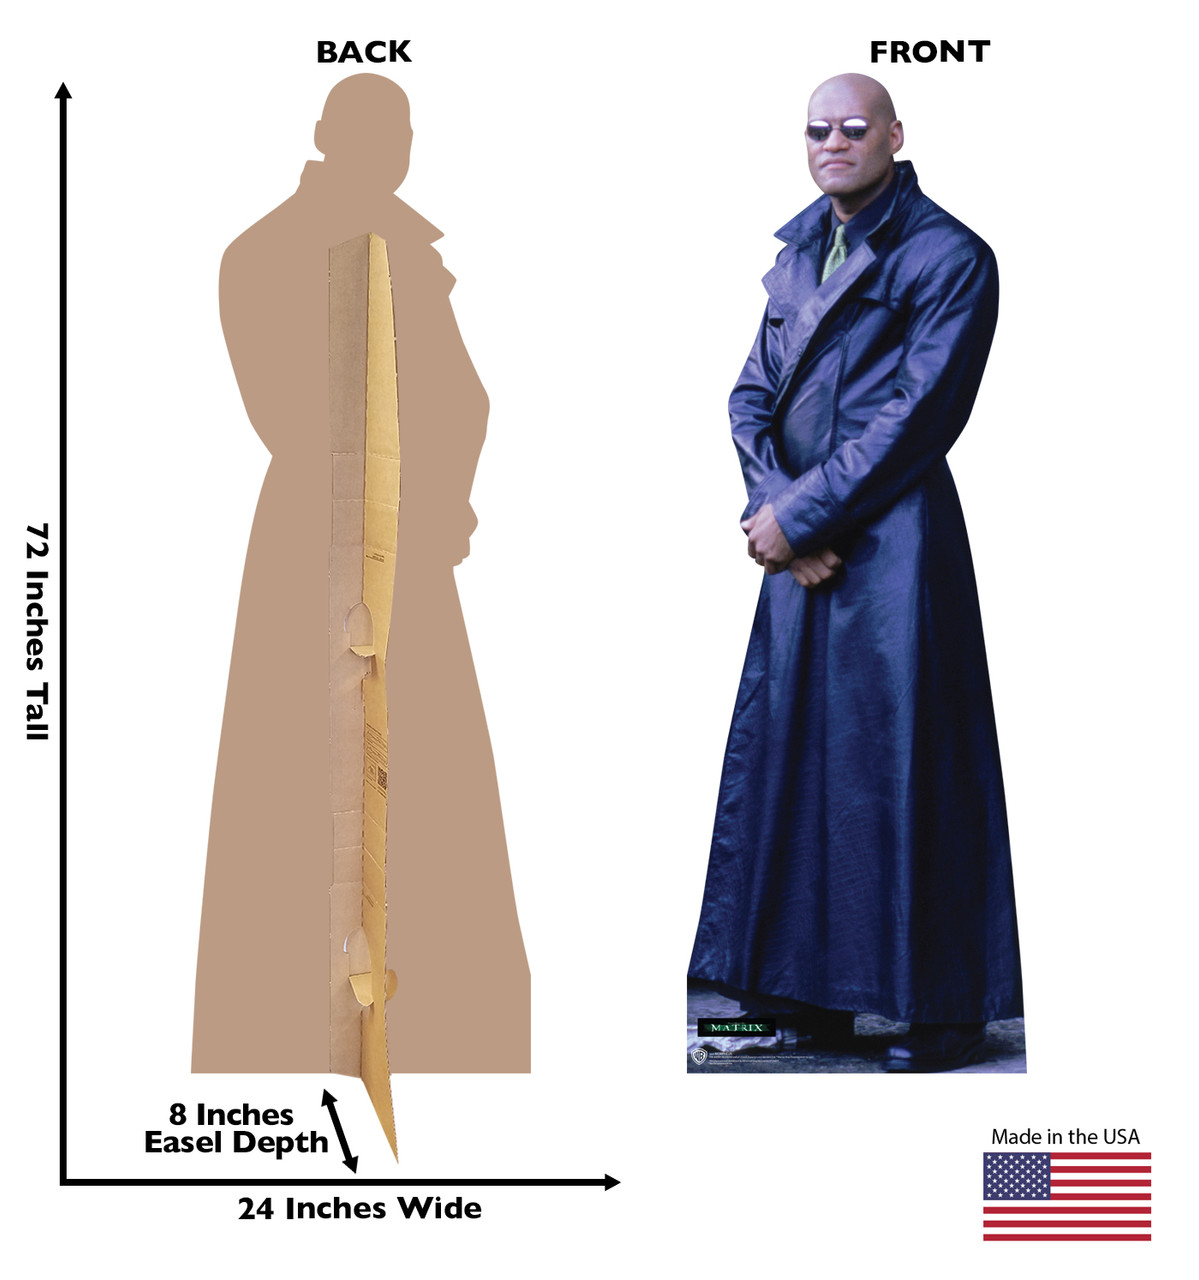 Life-size cardboard standee of Morpheus from the movie The Matrix with front and back dimensions.